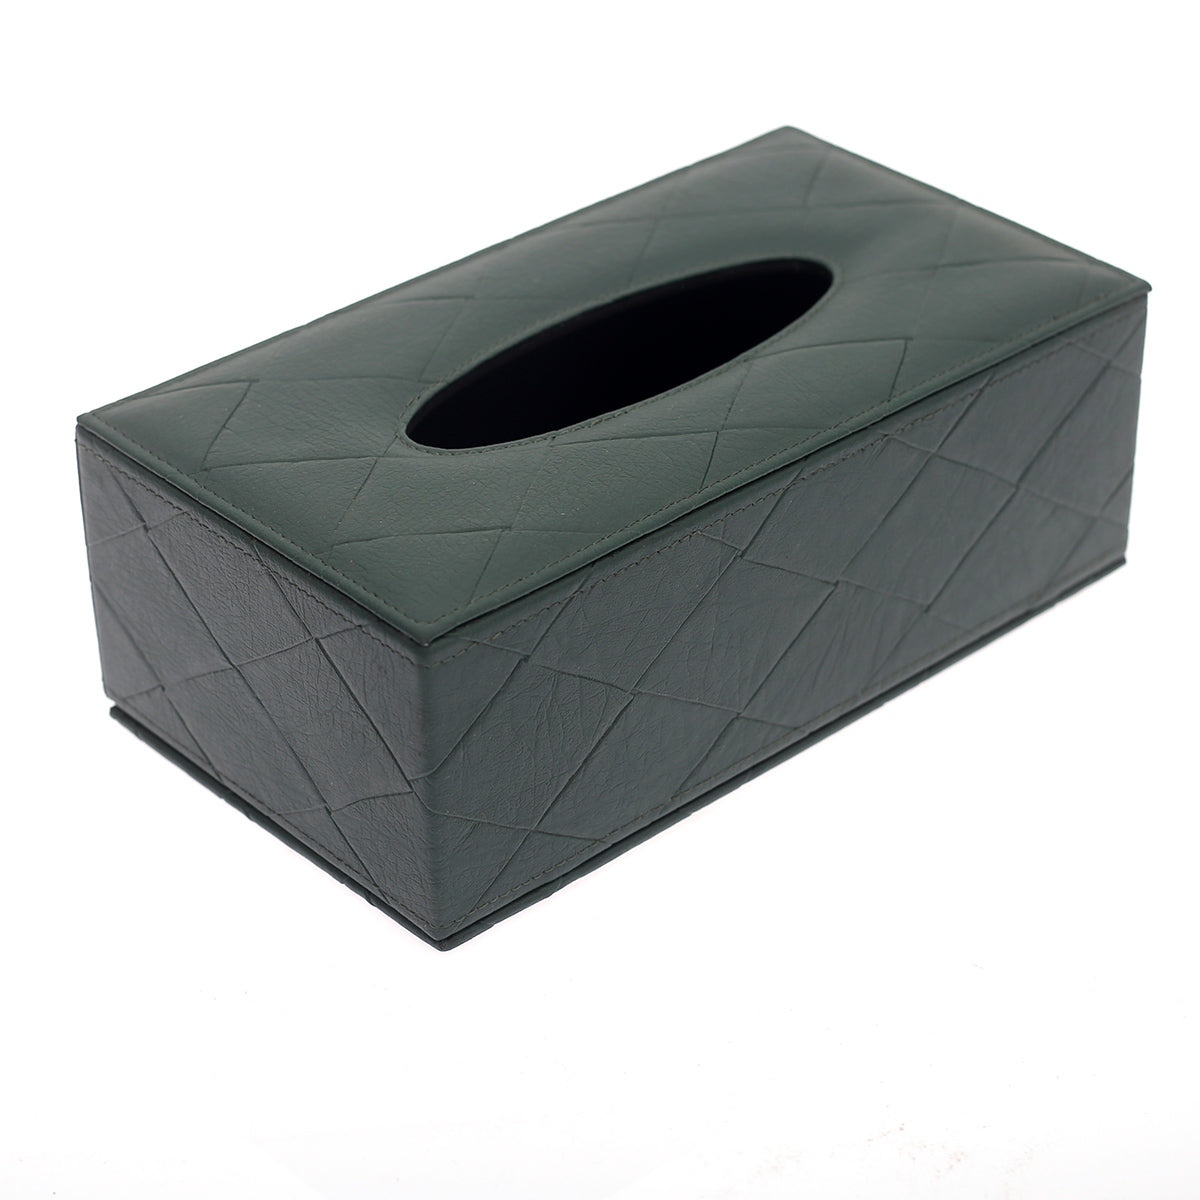 Green Leather Tissue box (Green)